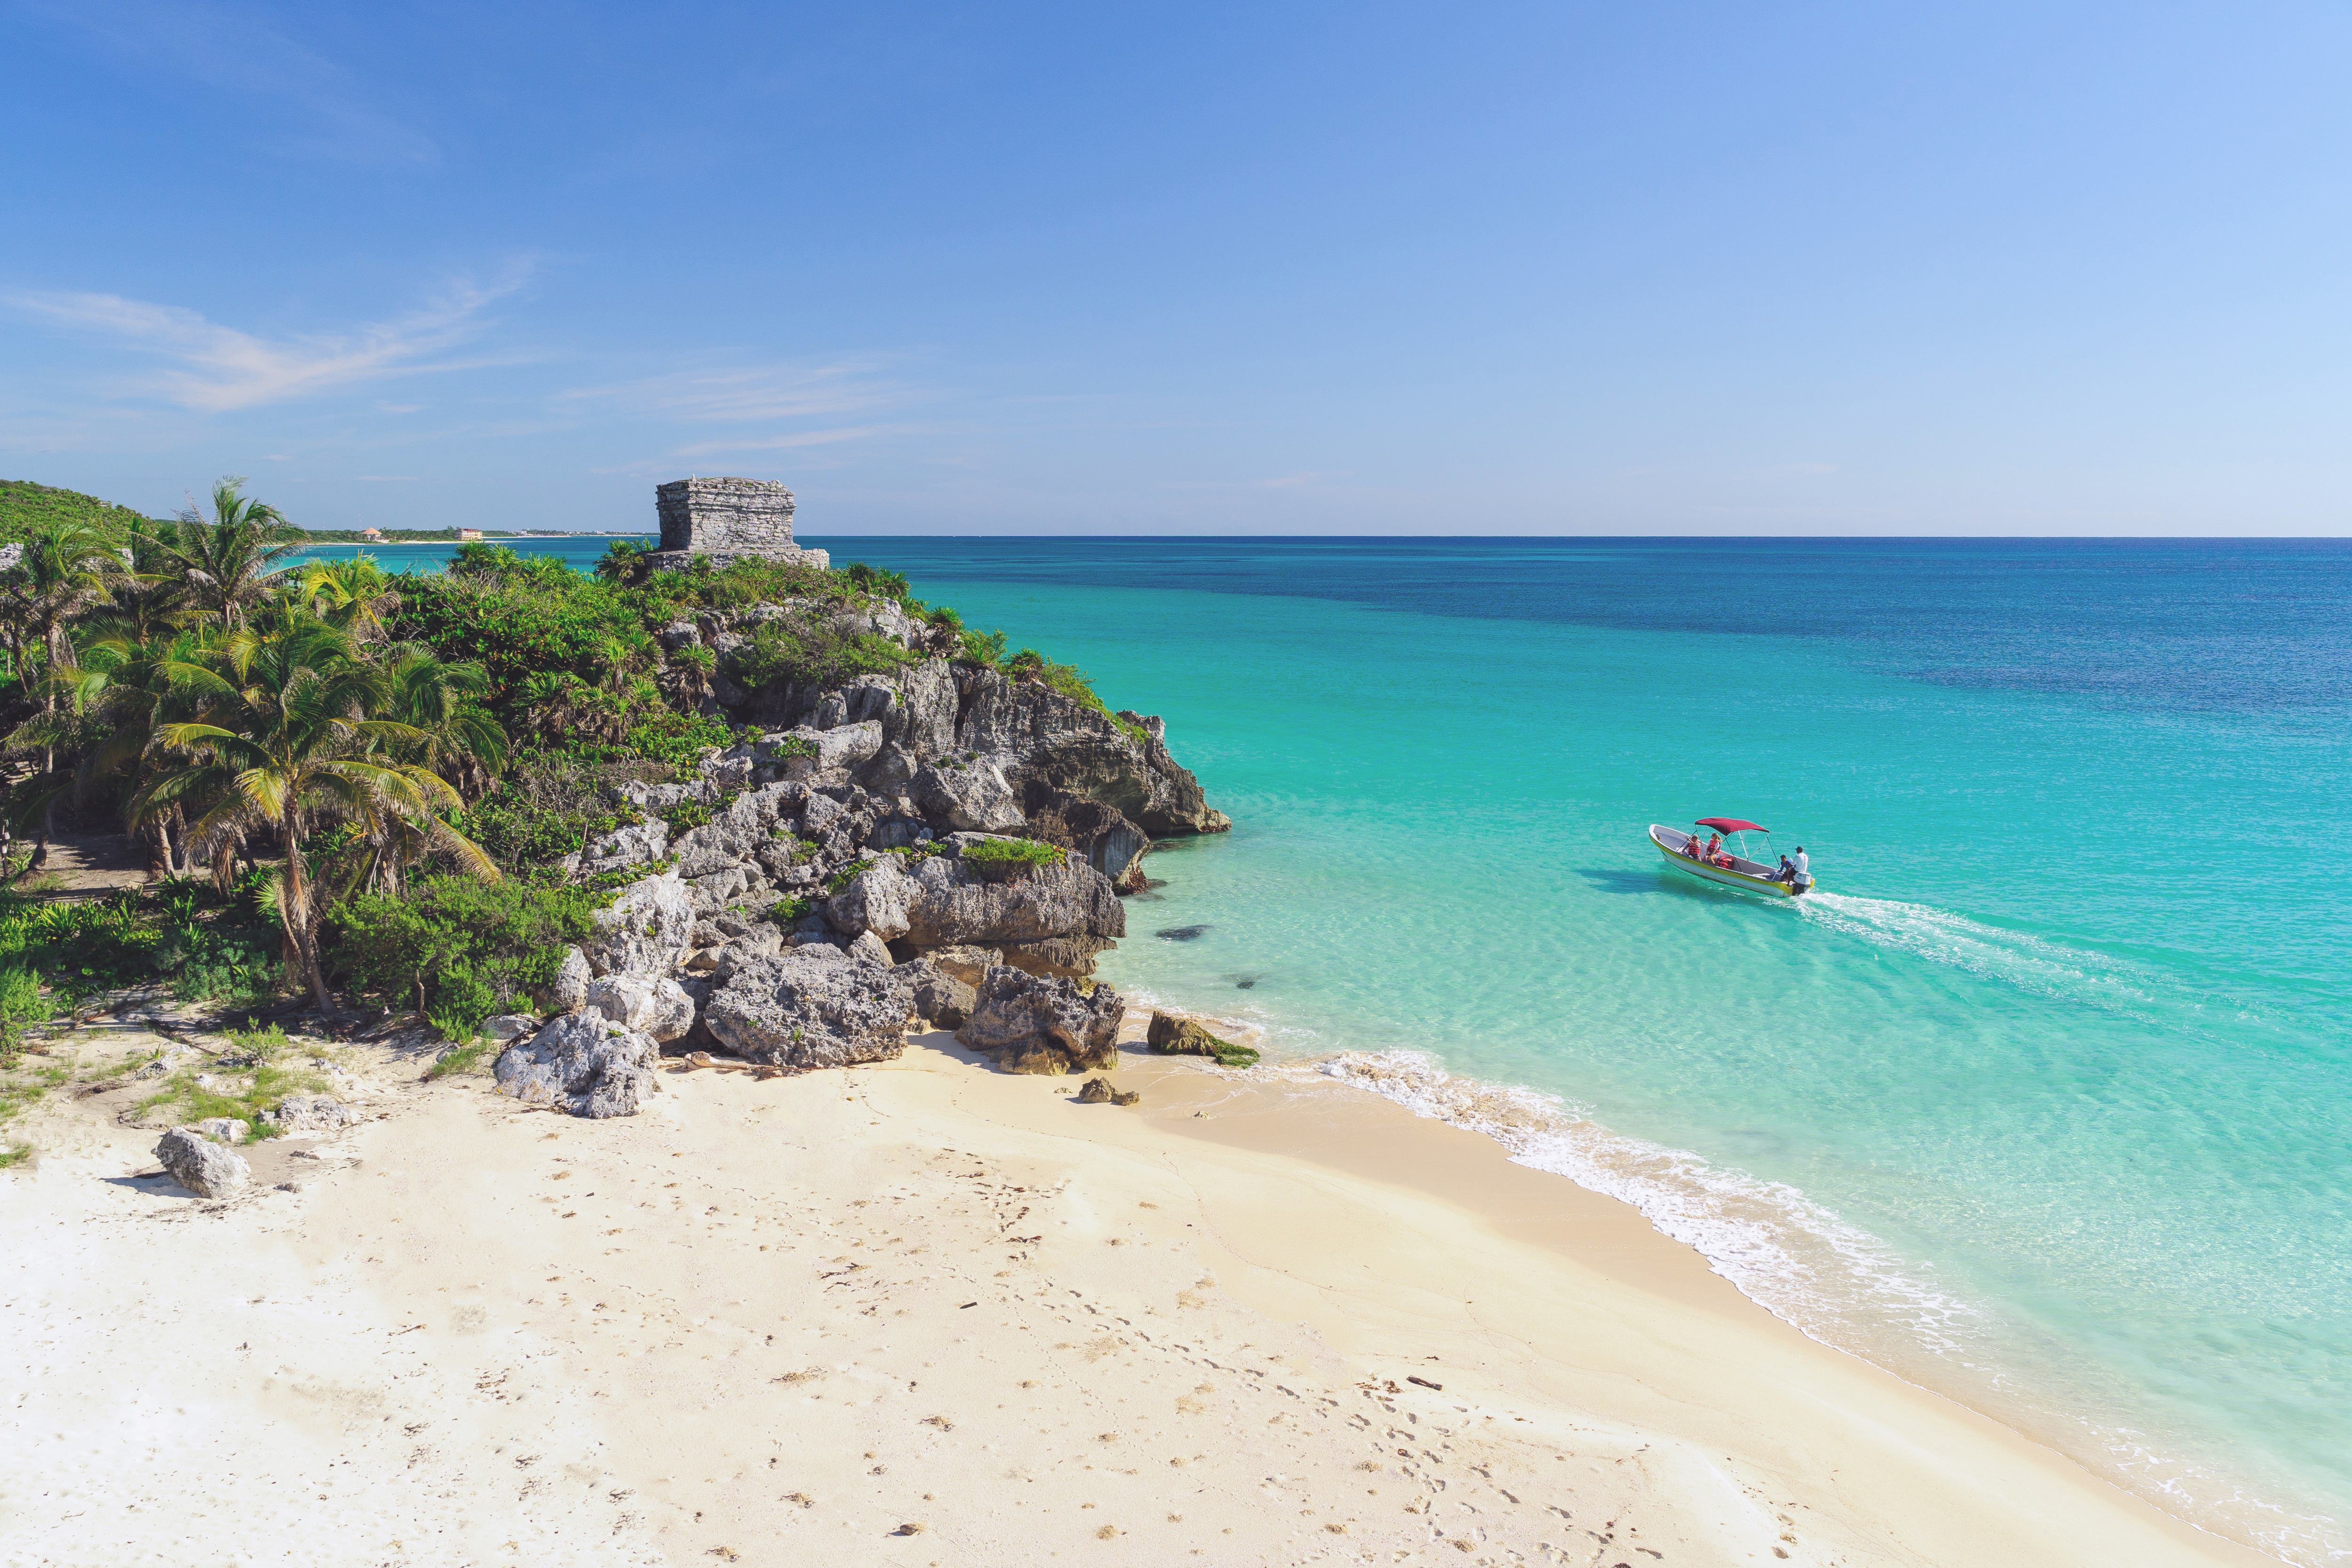 Mayan ruins on a seaside cliff overlooking a white-sand beach and turquoise waters in Tulum, Mexico 